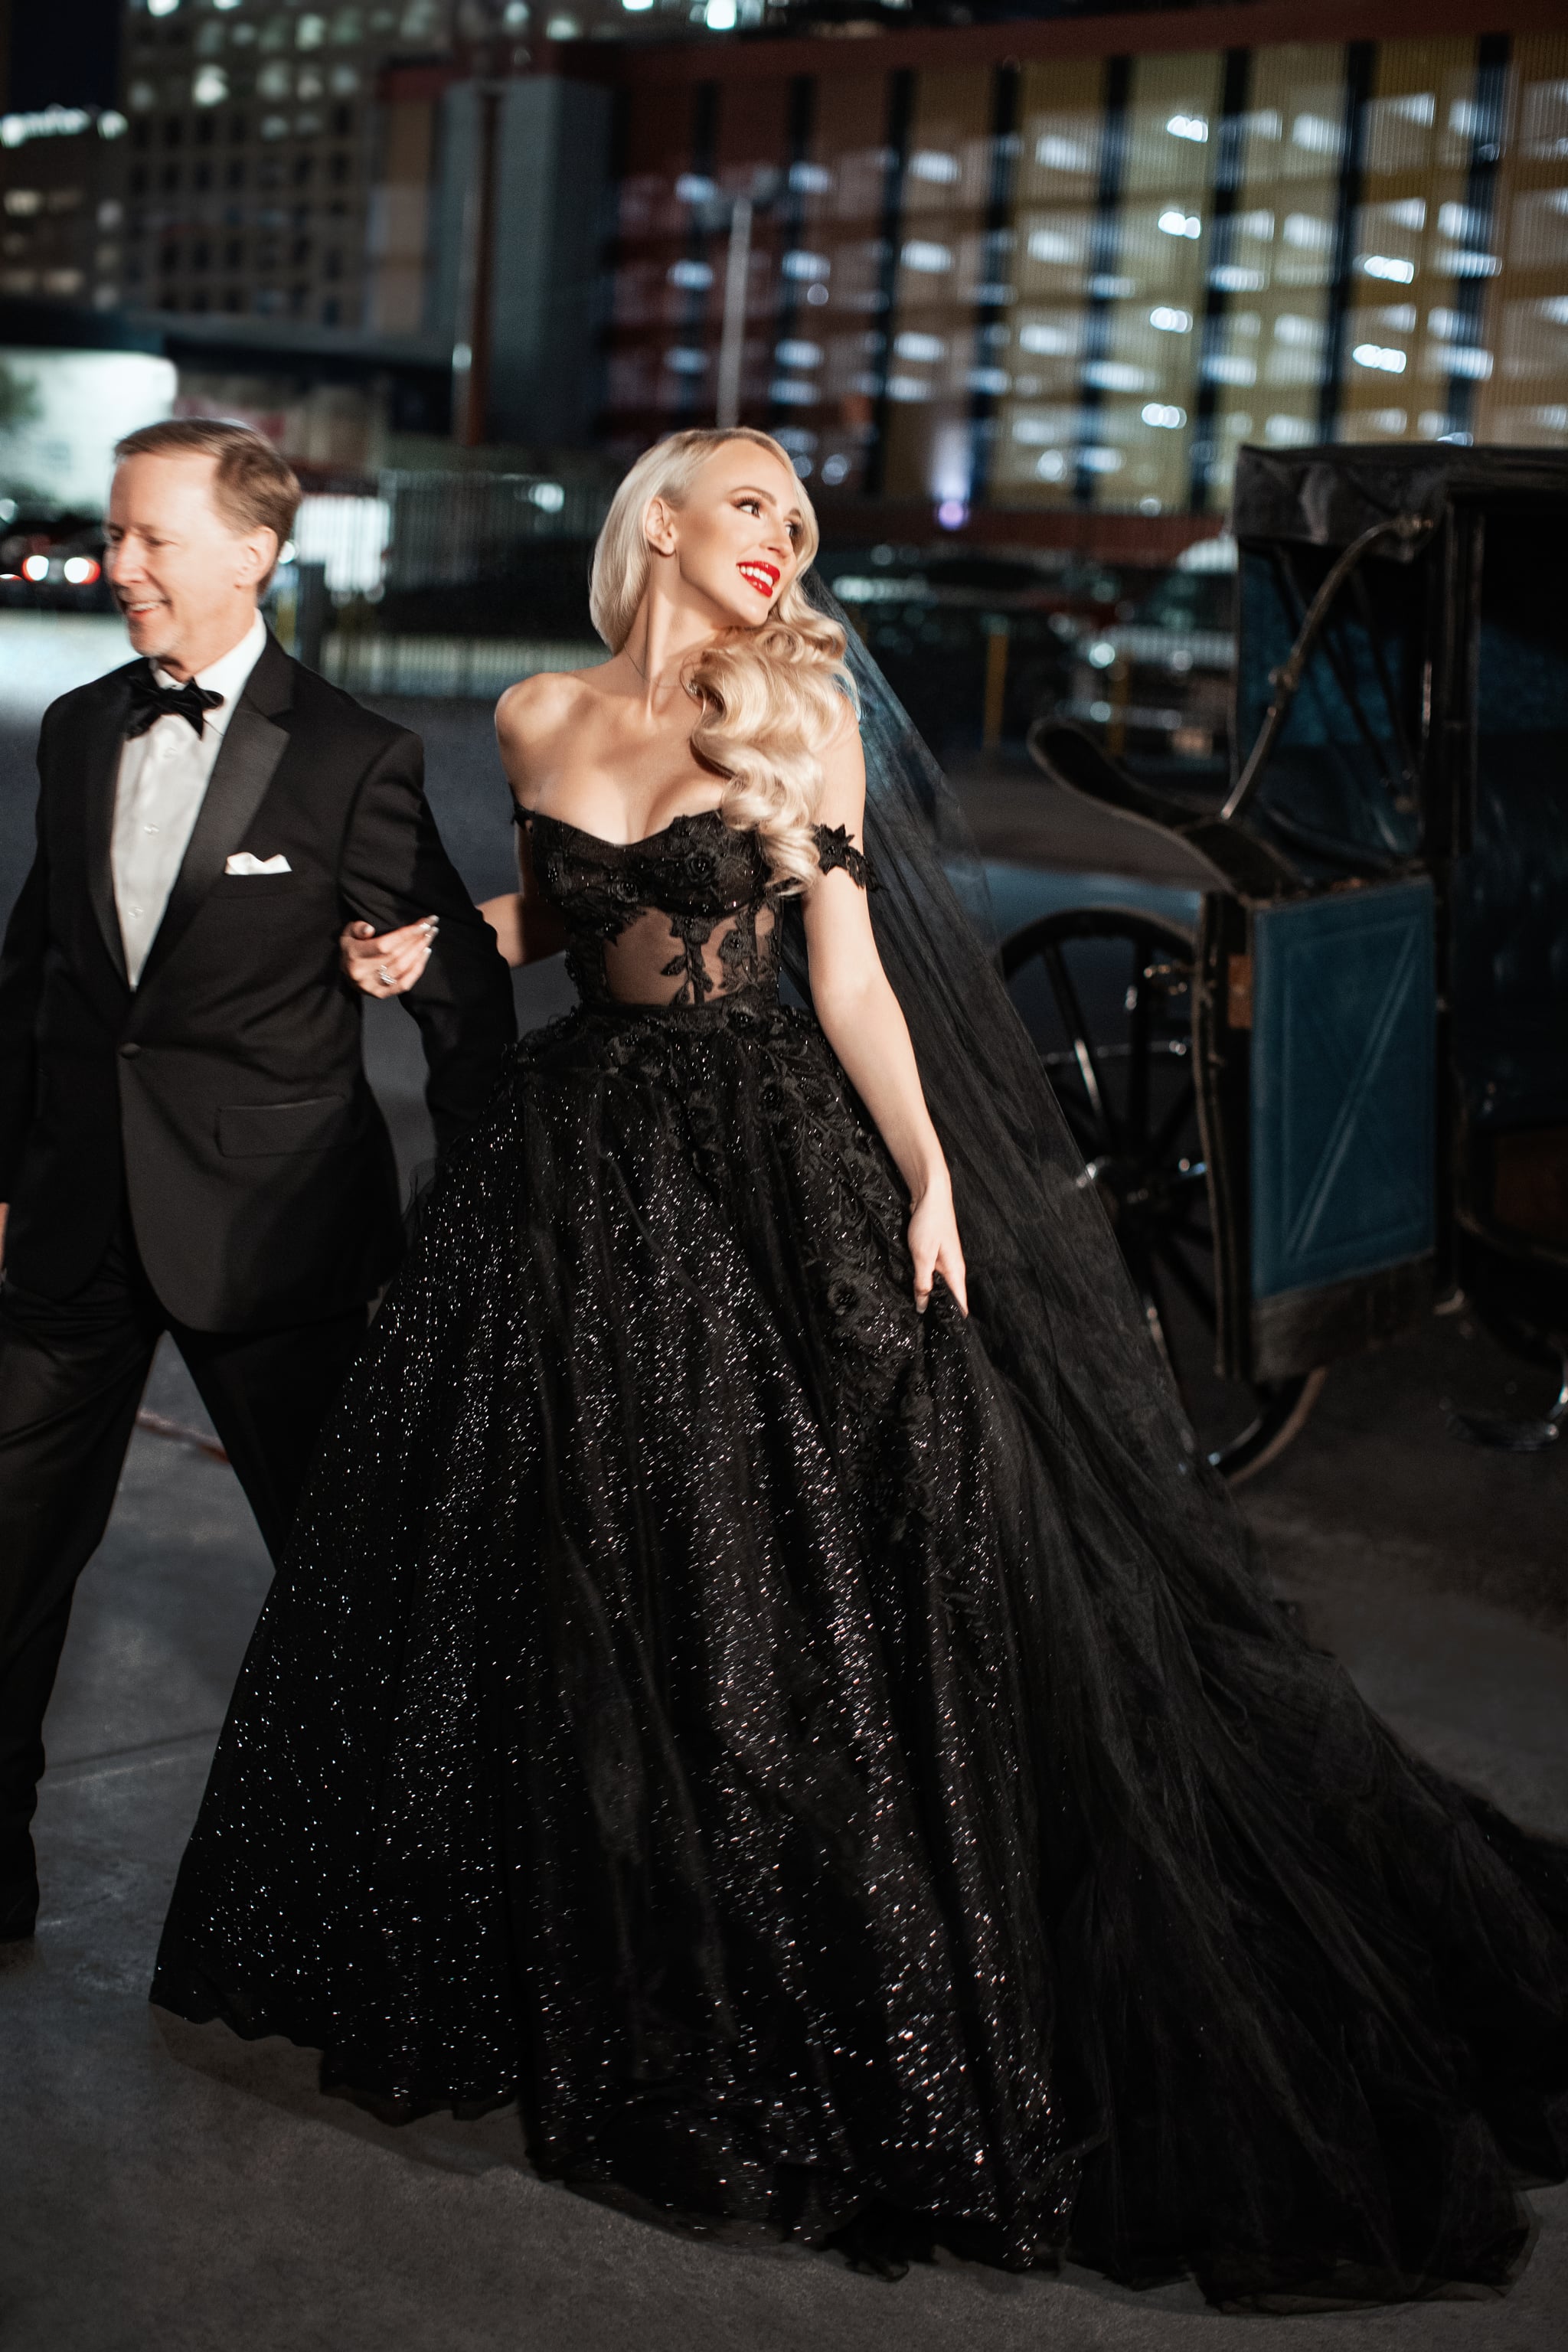 Fashion, Shopping & Style | Selling Sunset: Christine's Black Wedding Dress  Included a 22-Foot Veil Fit For a "Gothic Barbie" | POPSUGAR Fashion Photo 5